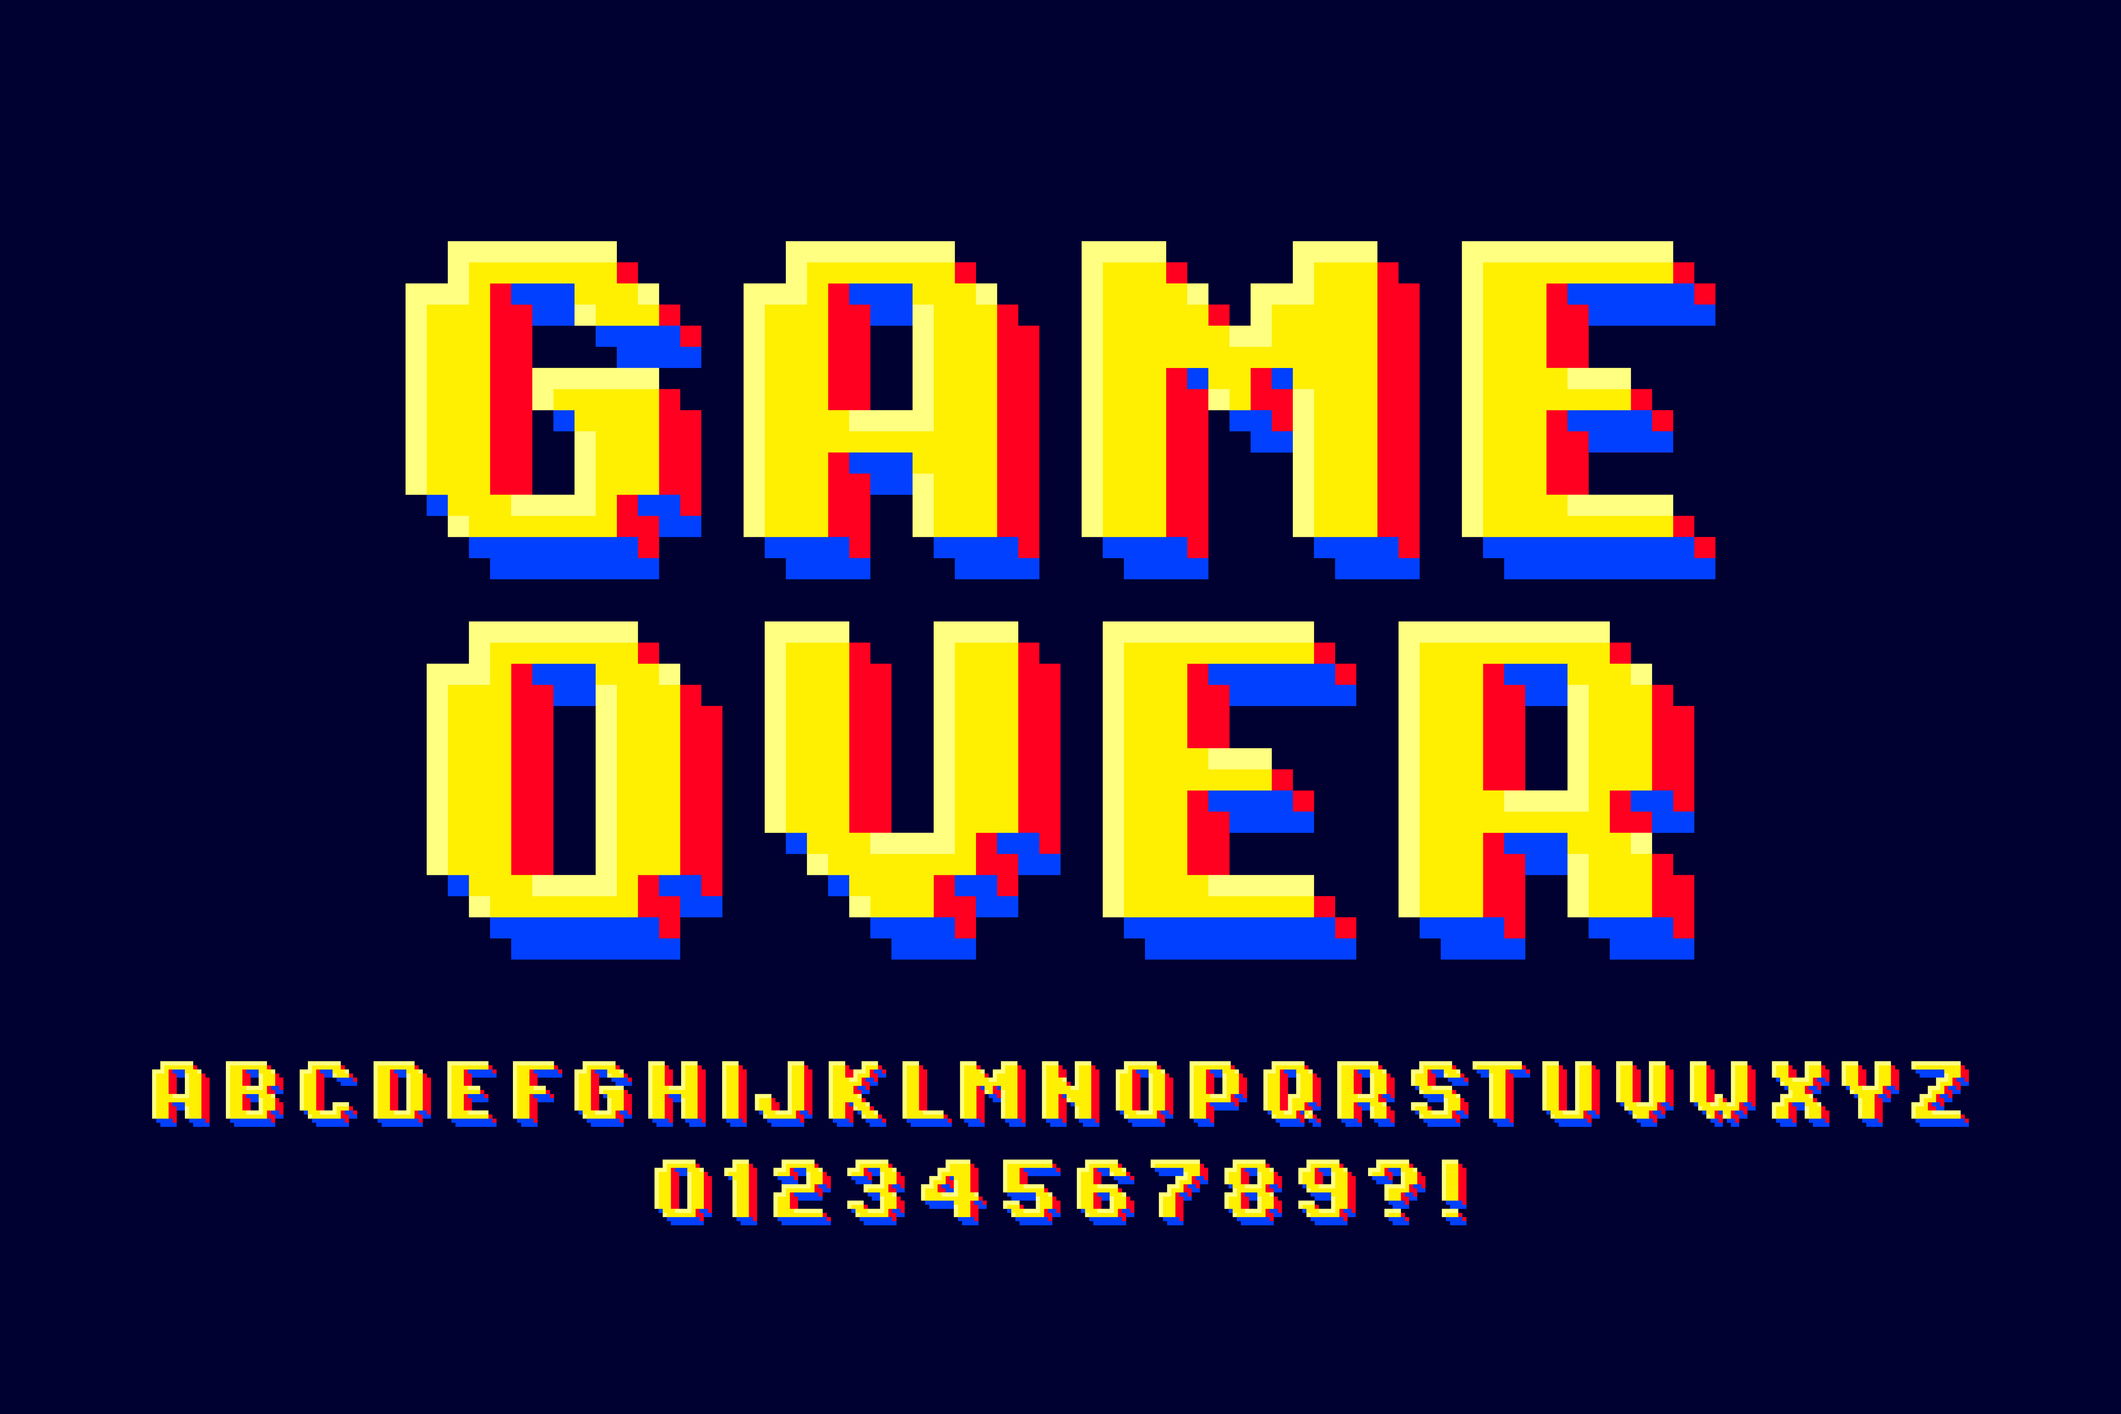 Pixel retro arcade game style font that says "Game Over" and has letters and numbers below.